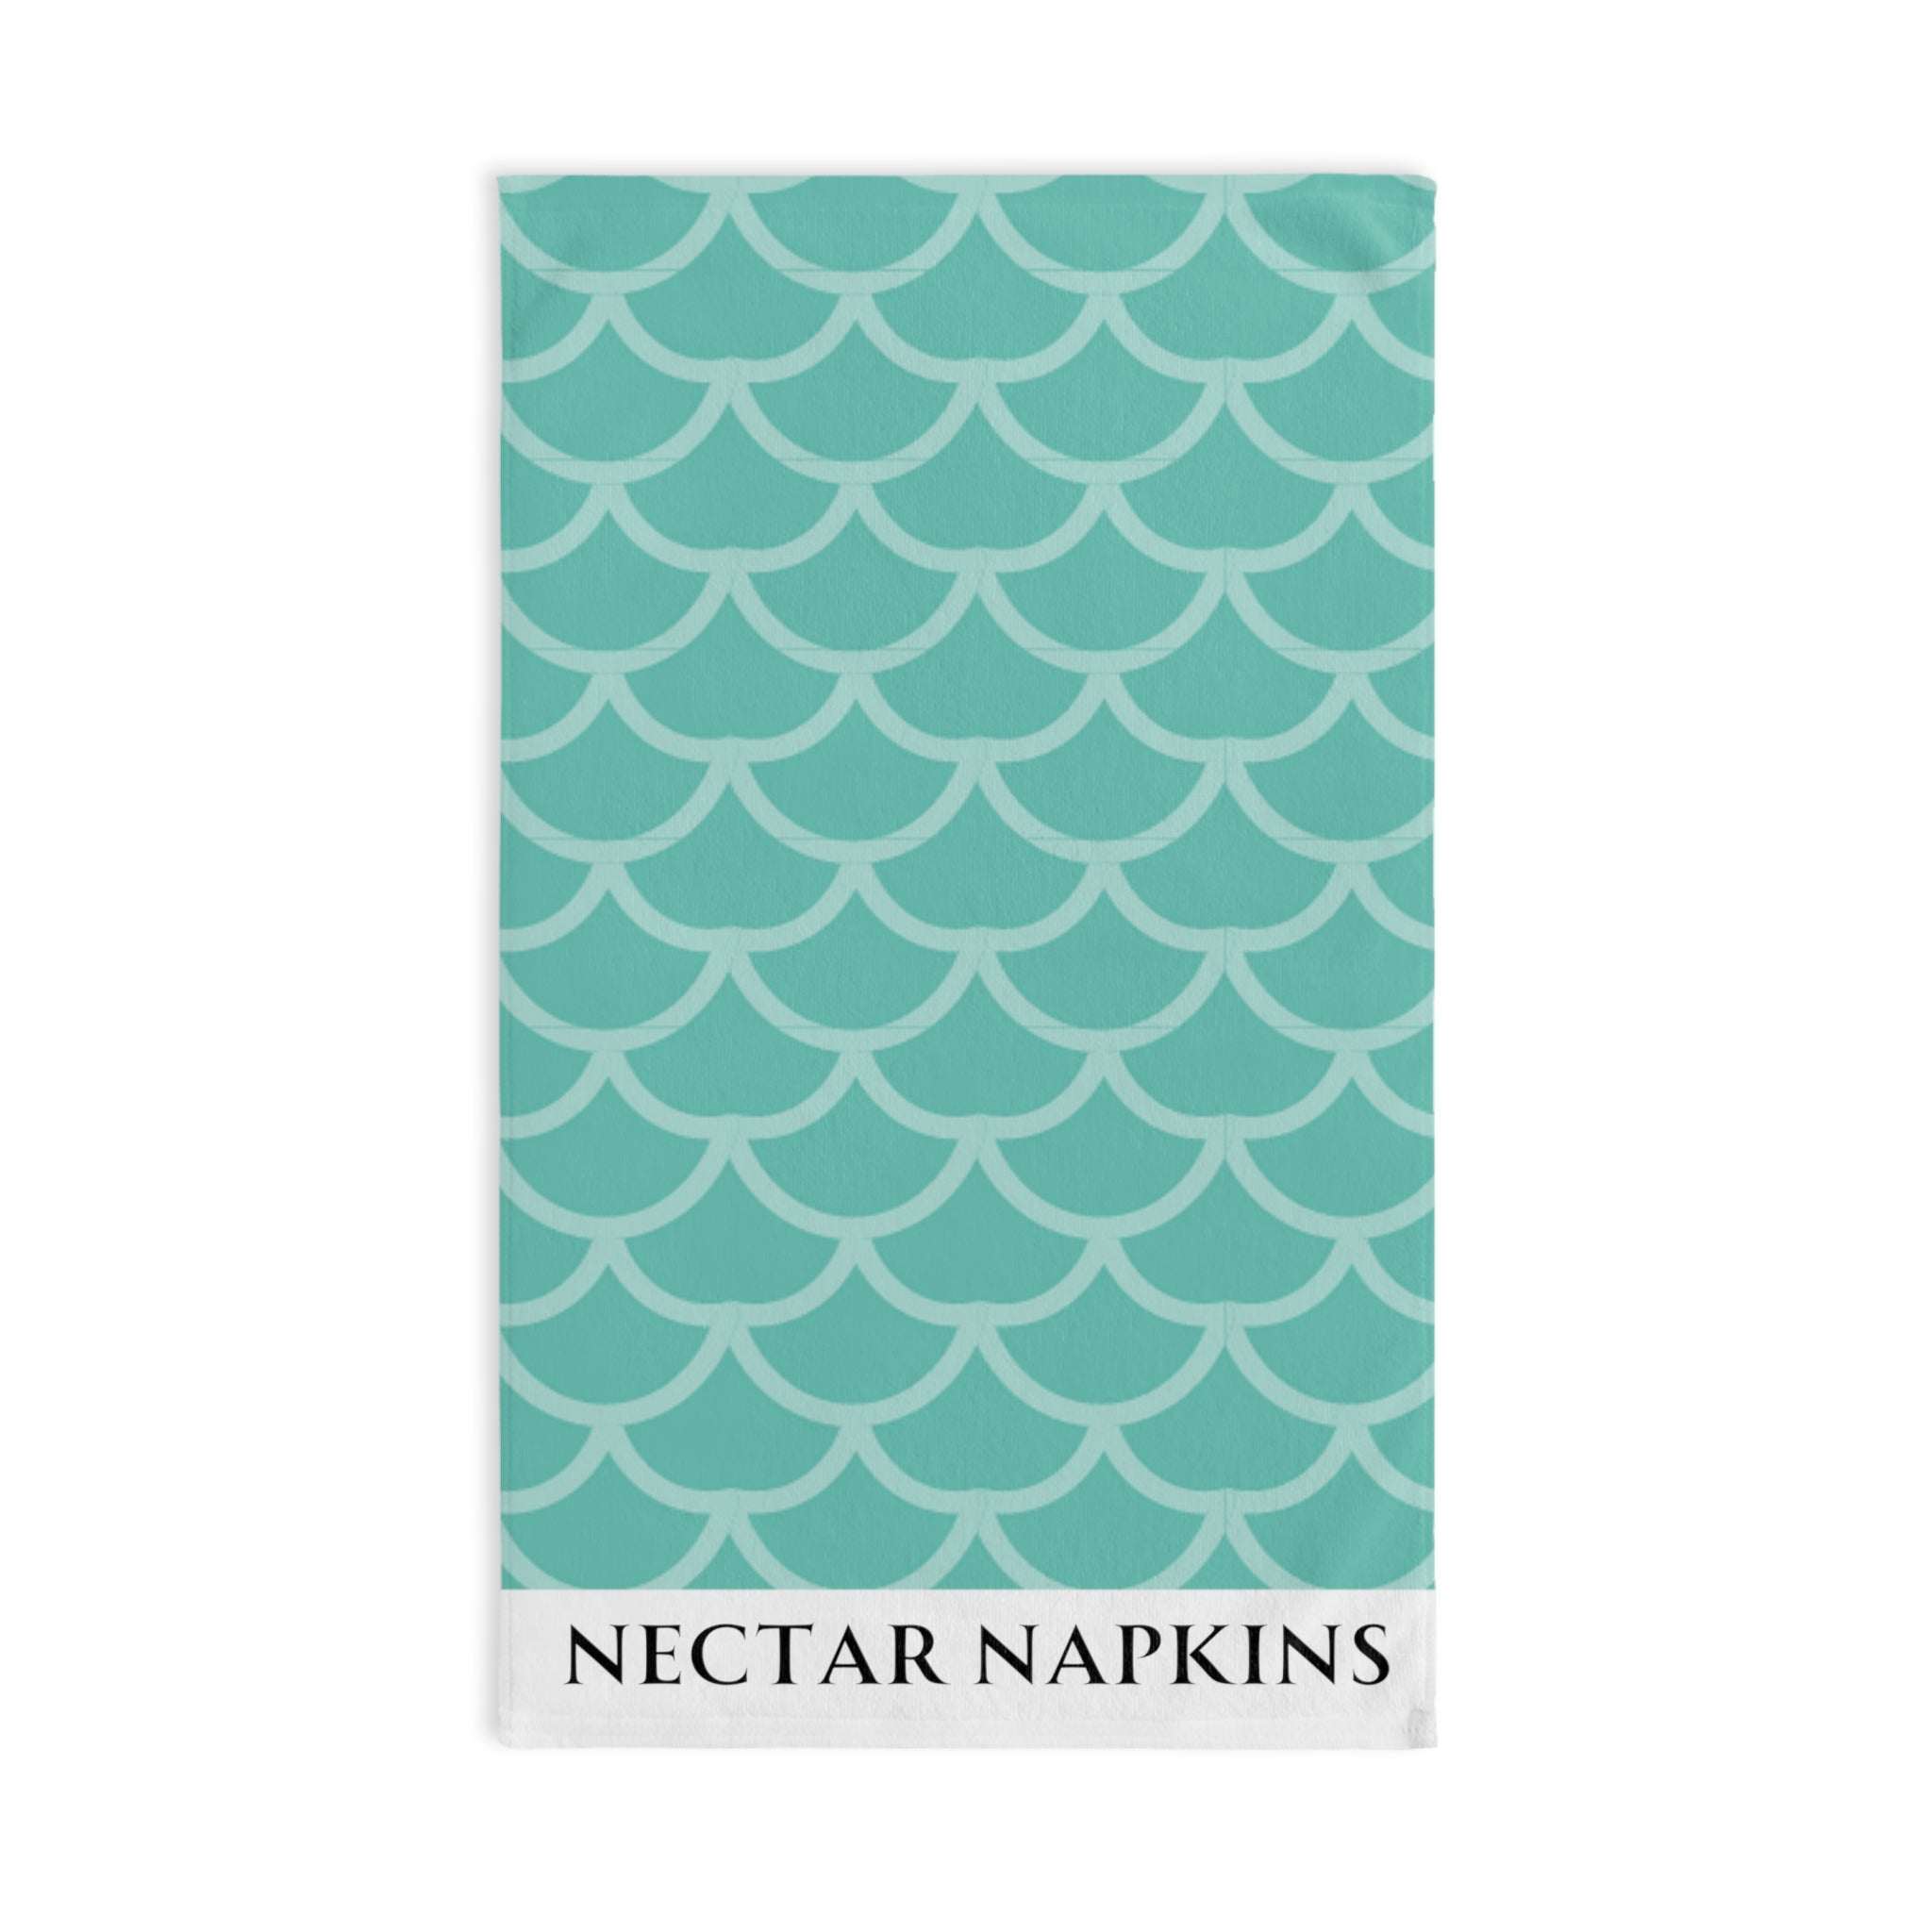 Mermaid Tail Mint White | Funny Gifts for Men - Gifts for Him - Birthday Gifts for Men, Him, Her, Husband, Boyfriend, Girlfriend, New Couple Gifts, Fathers & Valentines Day Gifts, Christmas Gifts NECTAR NAPKINS